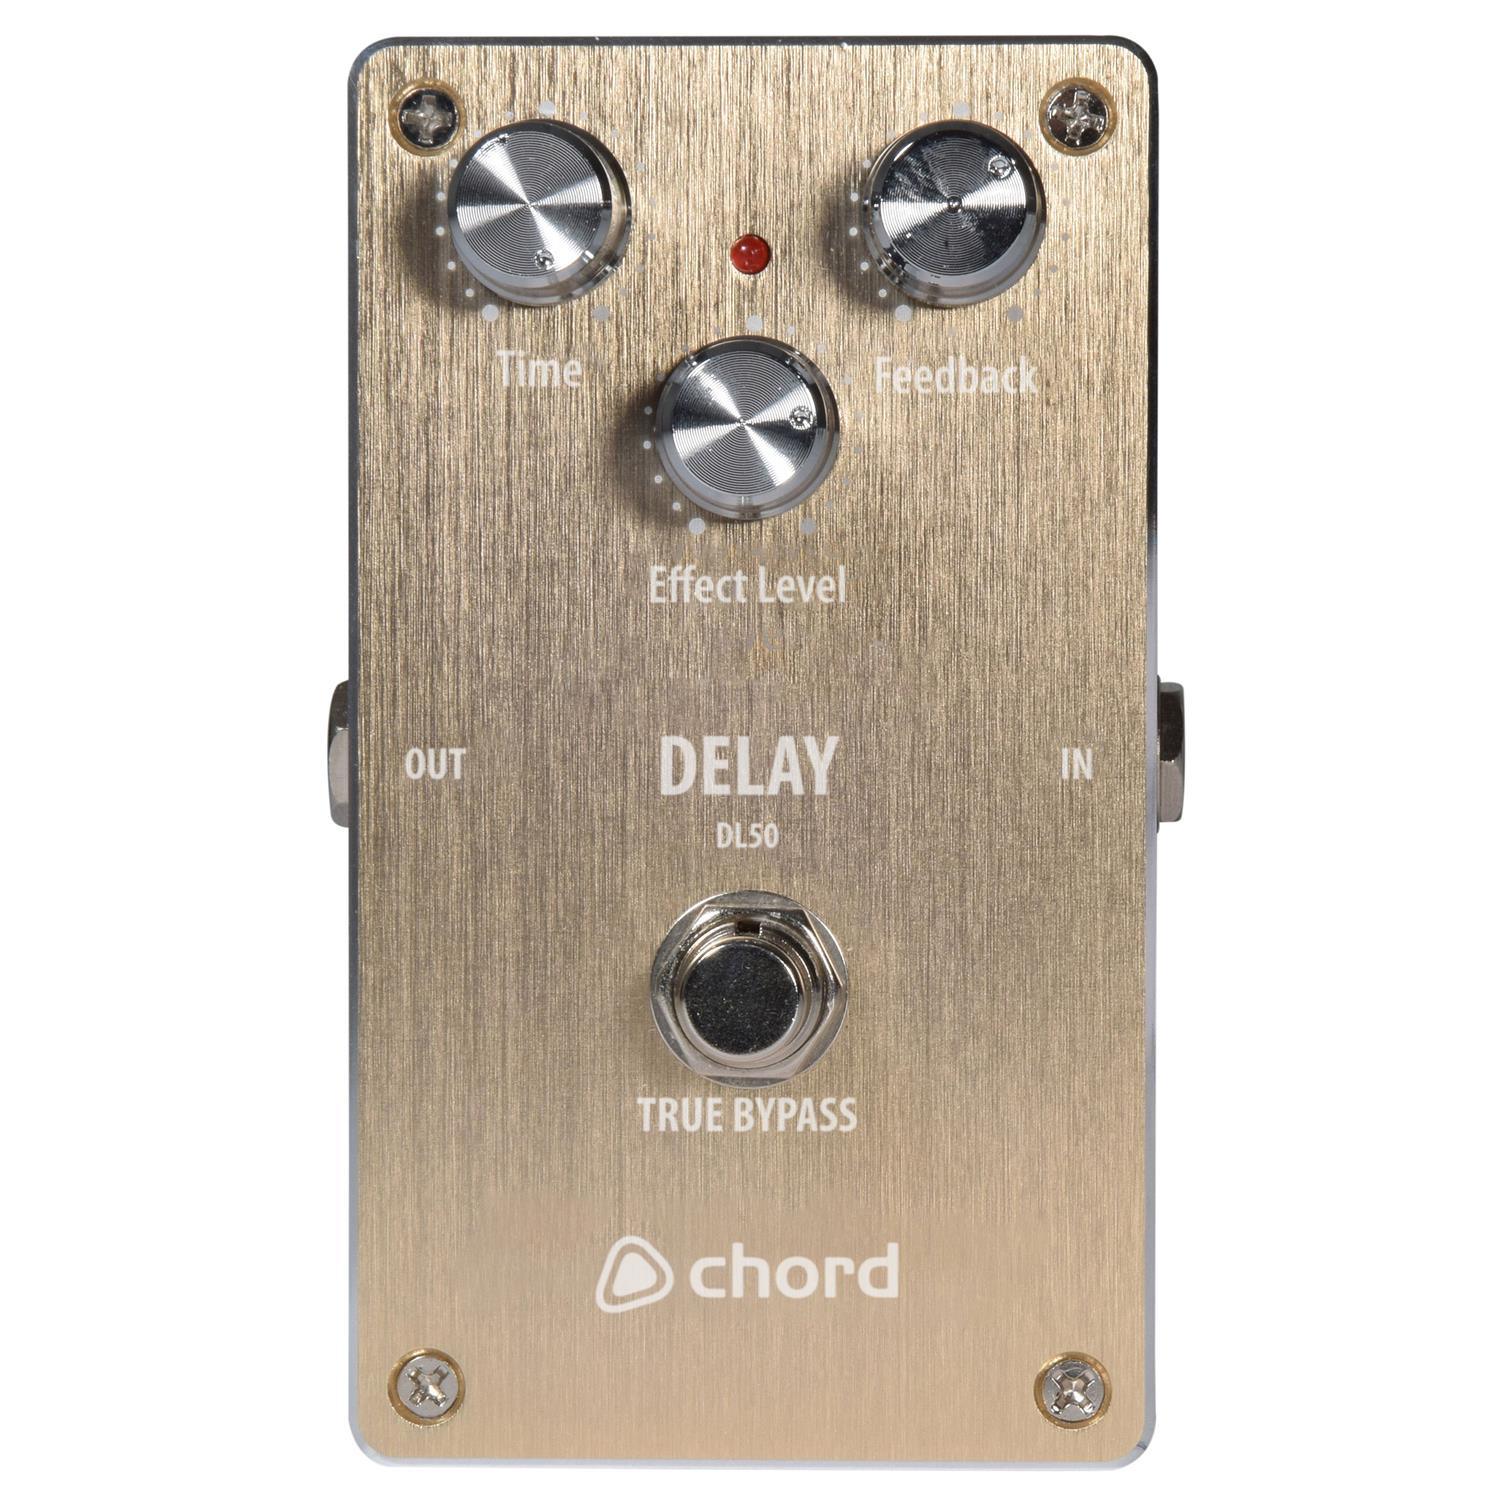 Chord DL-50 Delay Effect Pedal - DY Pro Audio